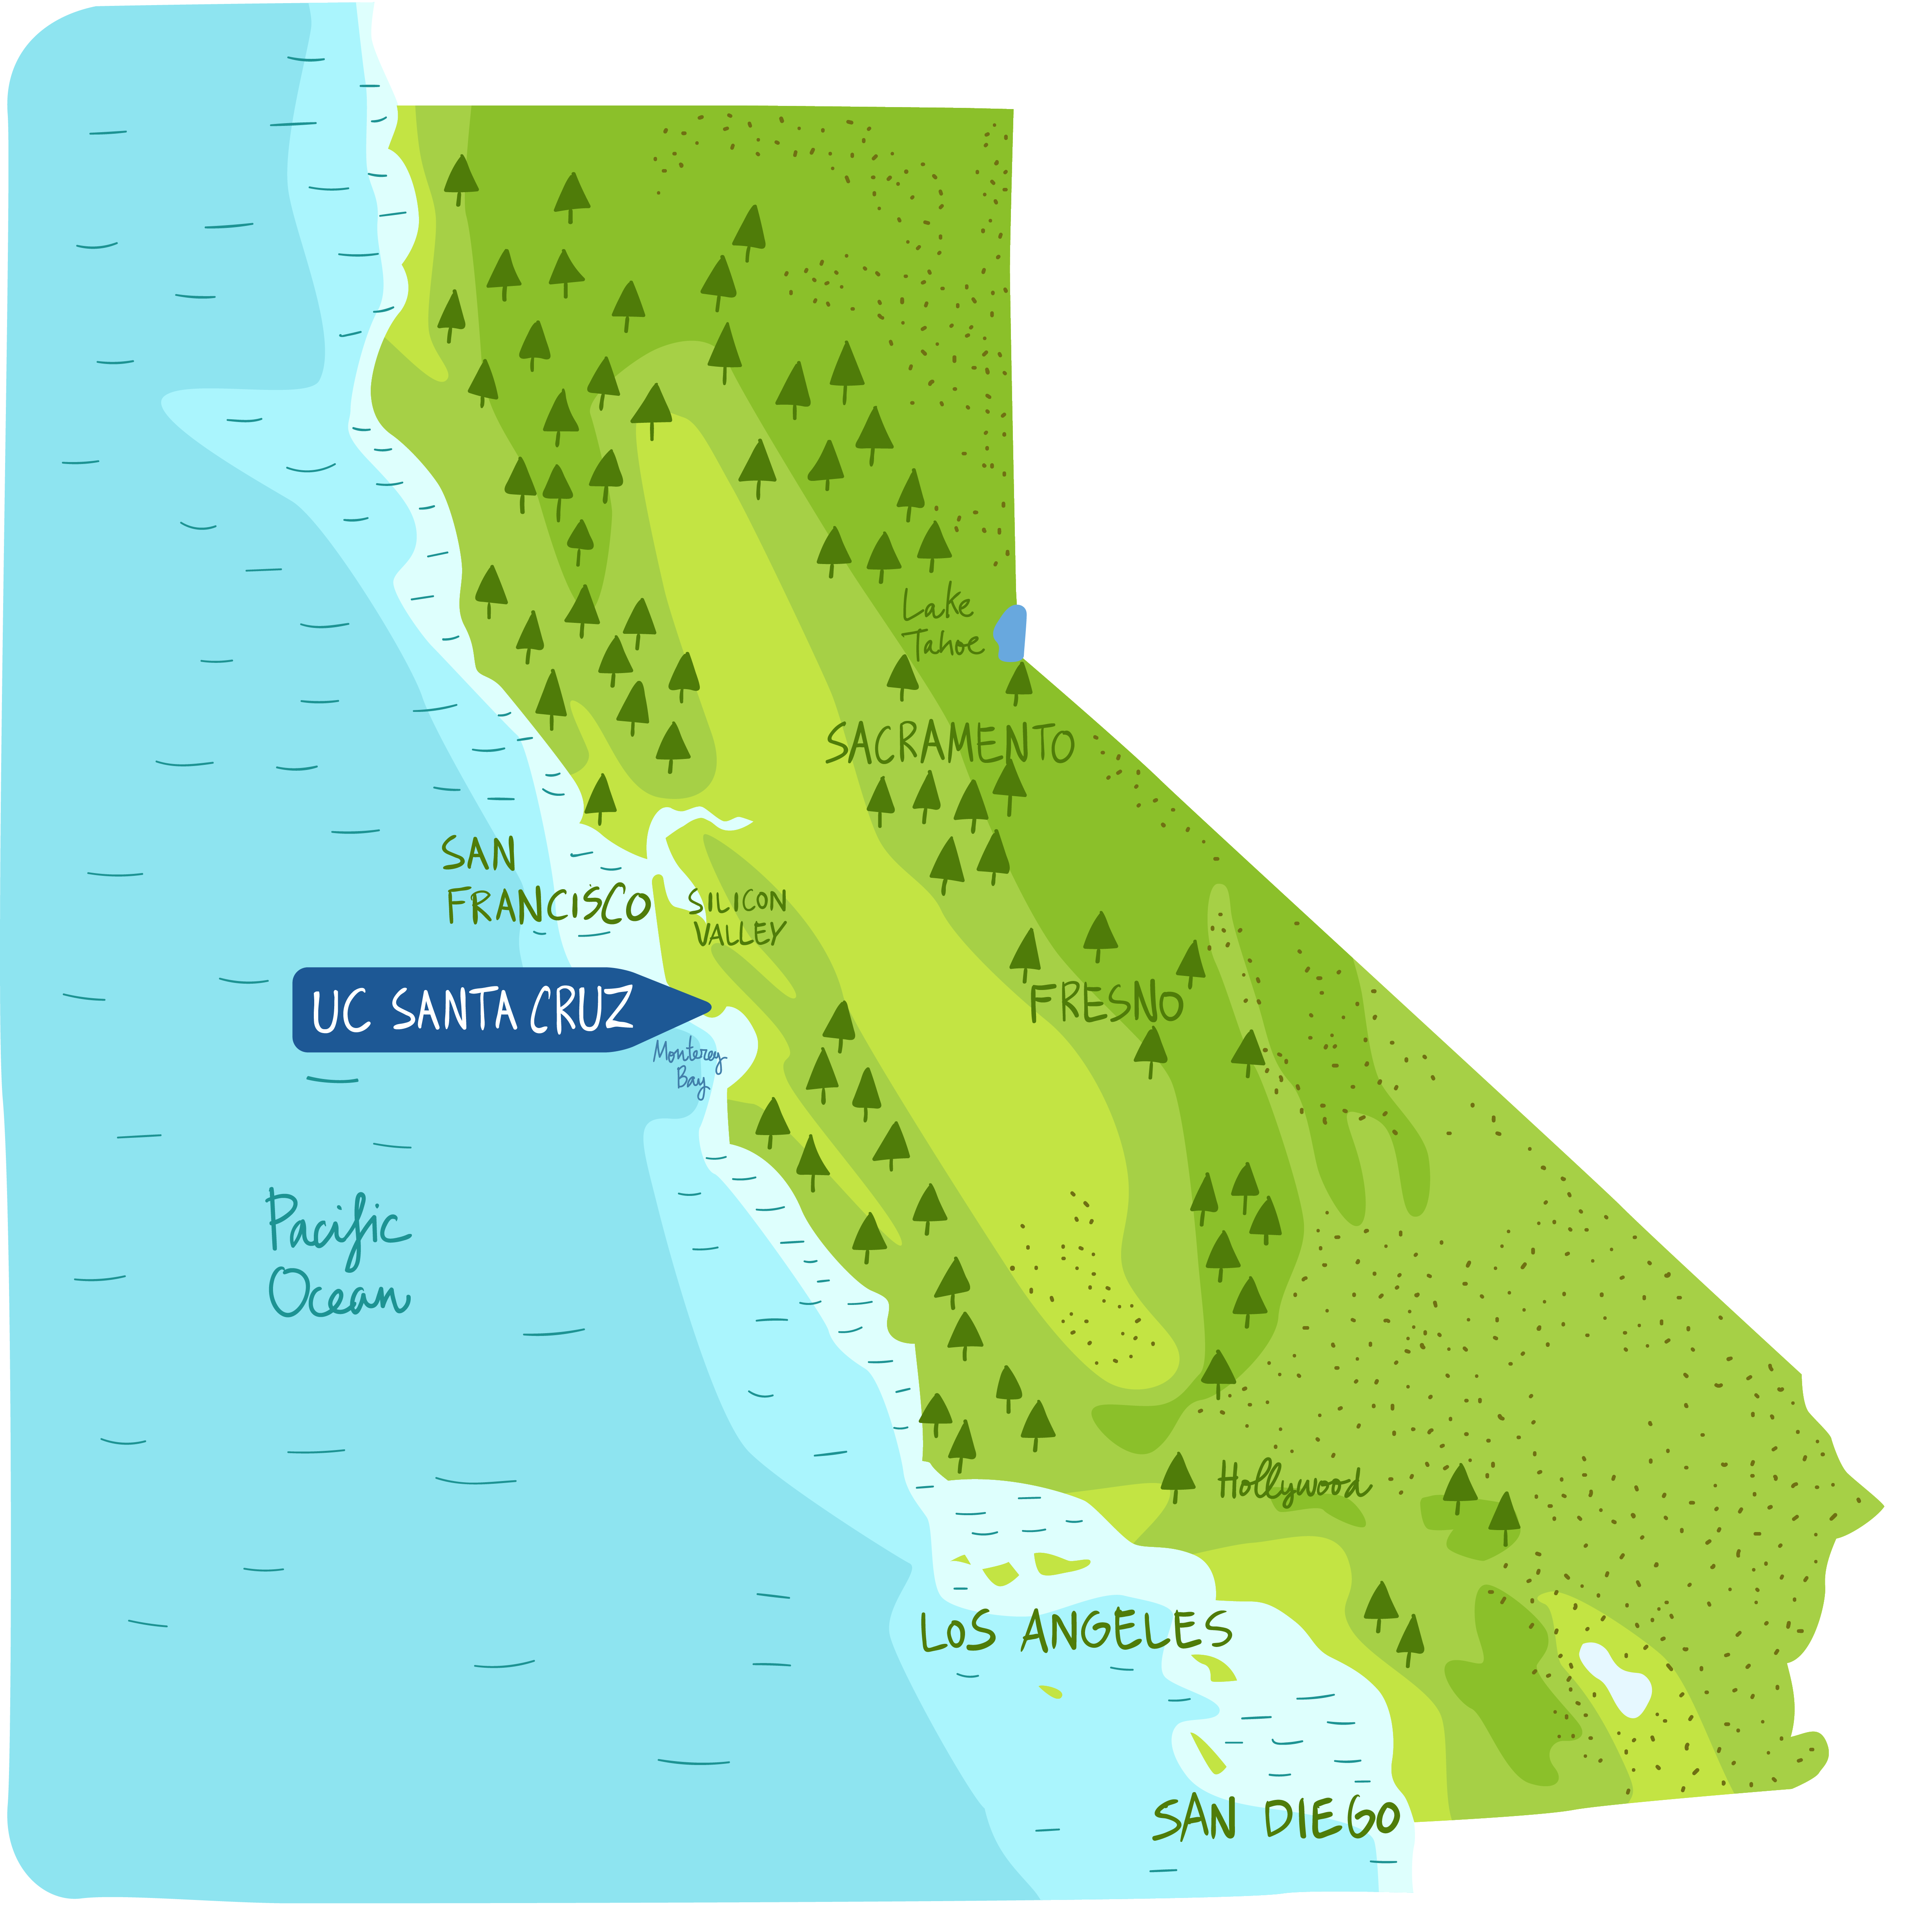 Illustration of the state of California with key cities and UC Santa Cruz called out.